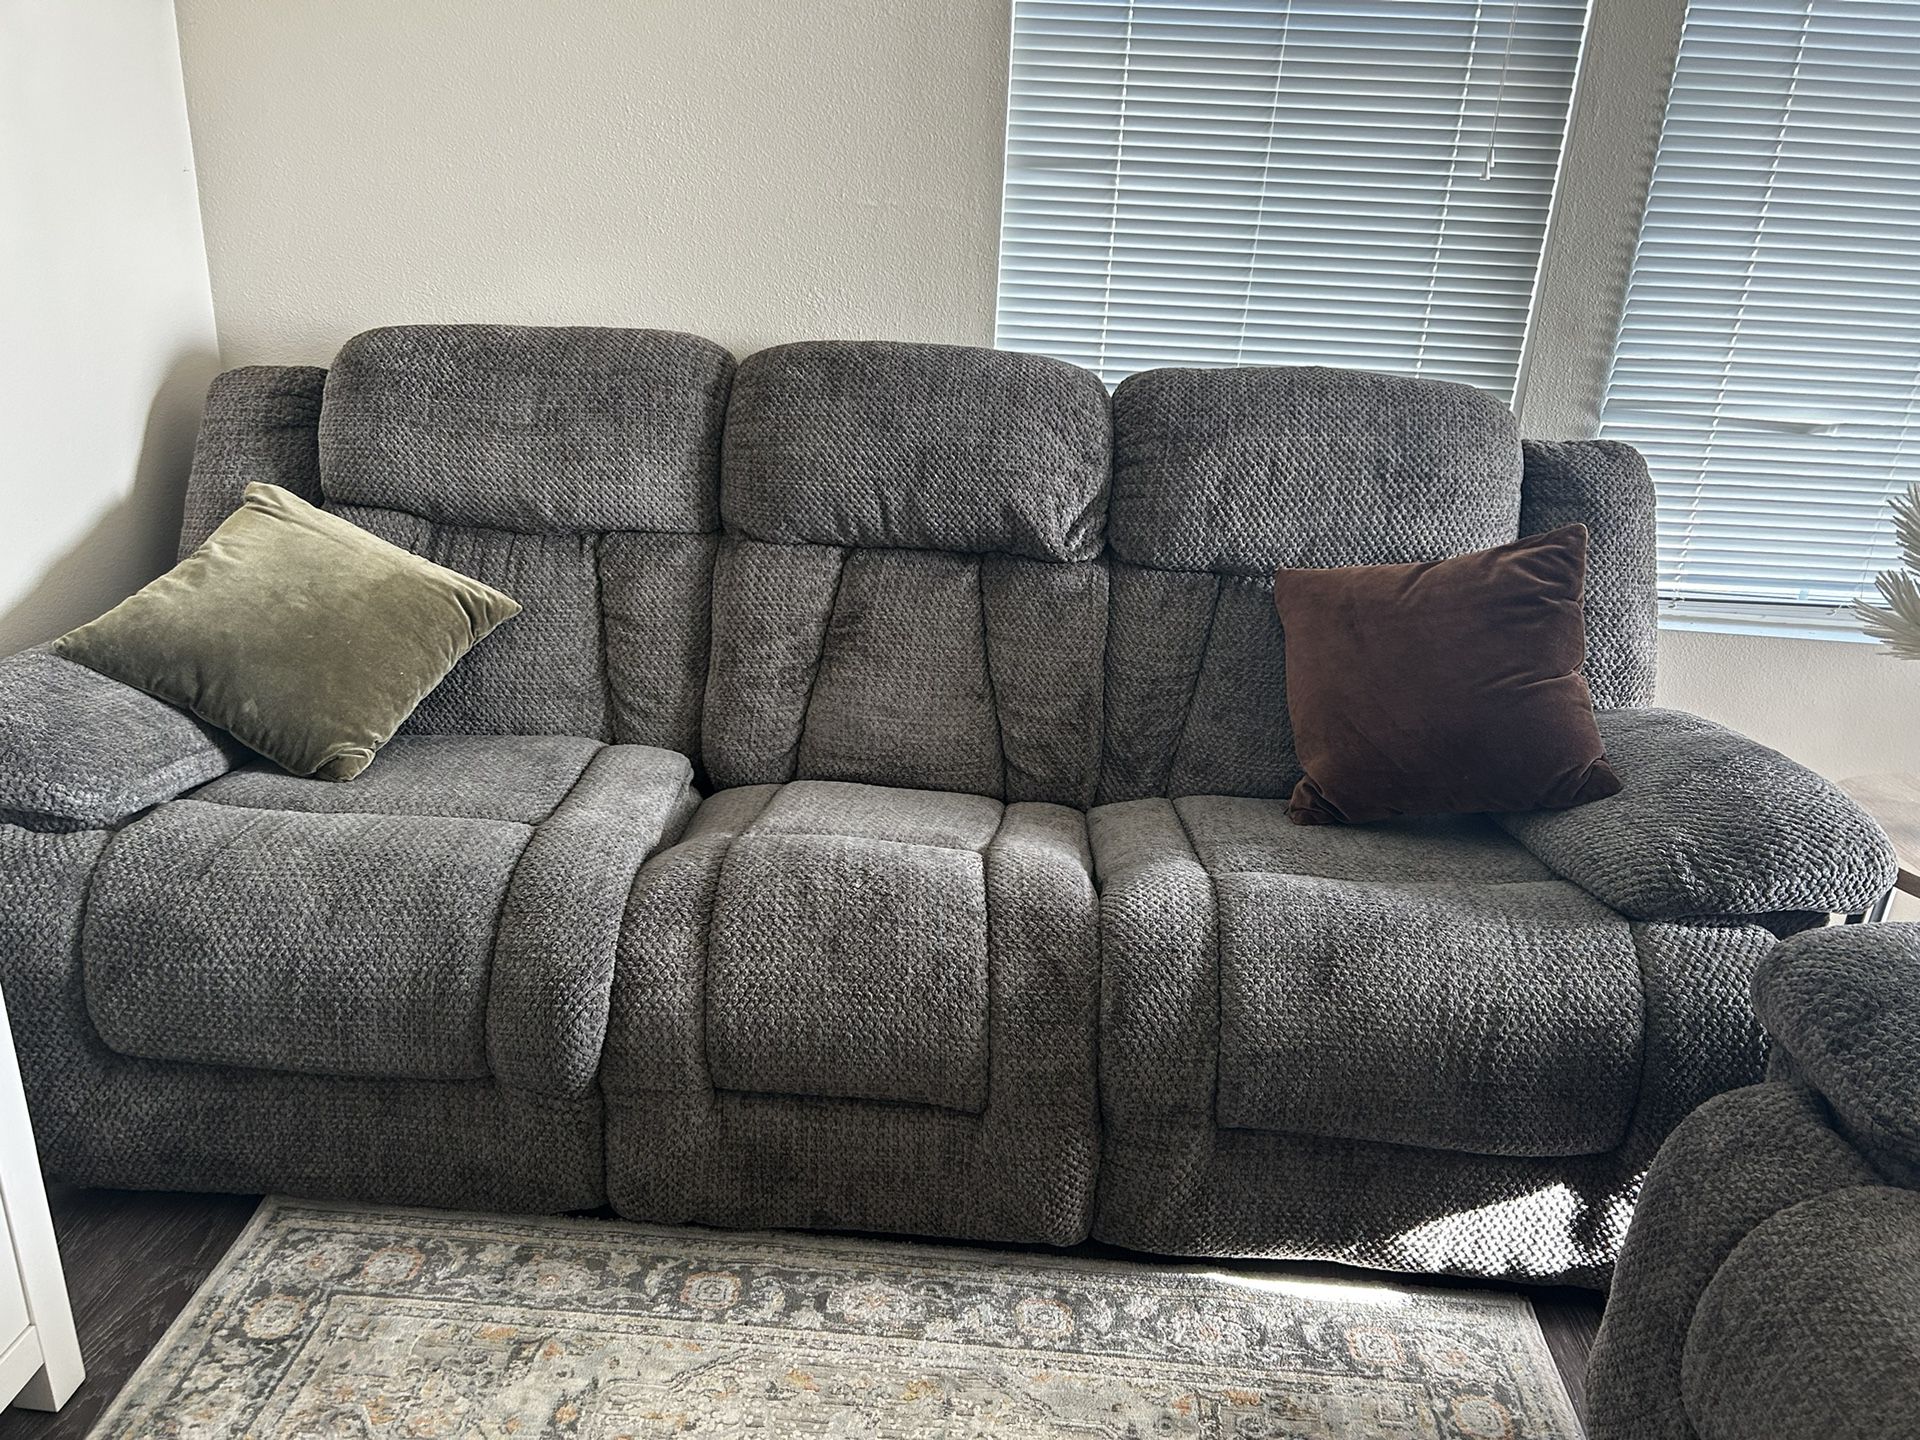 Electric Recliner Couches With Charger Connection For Phones 